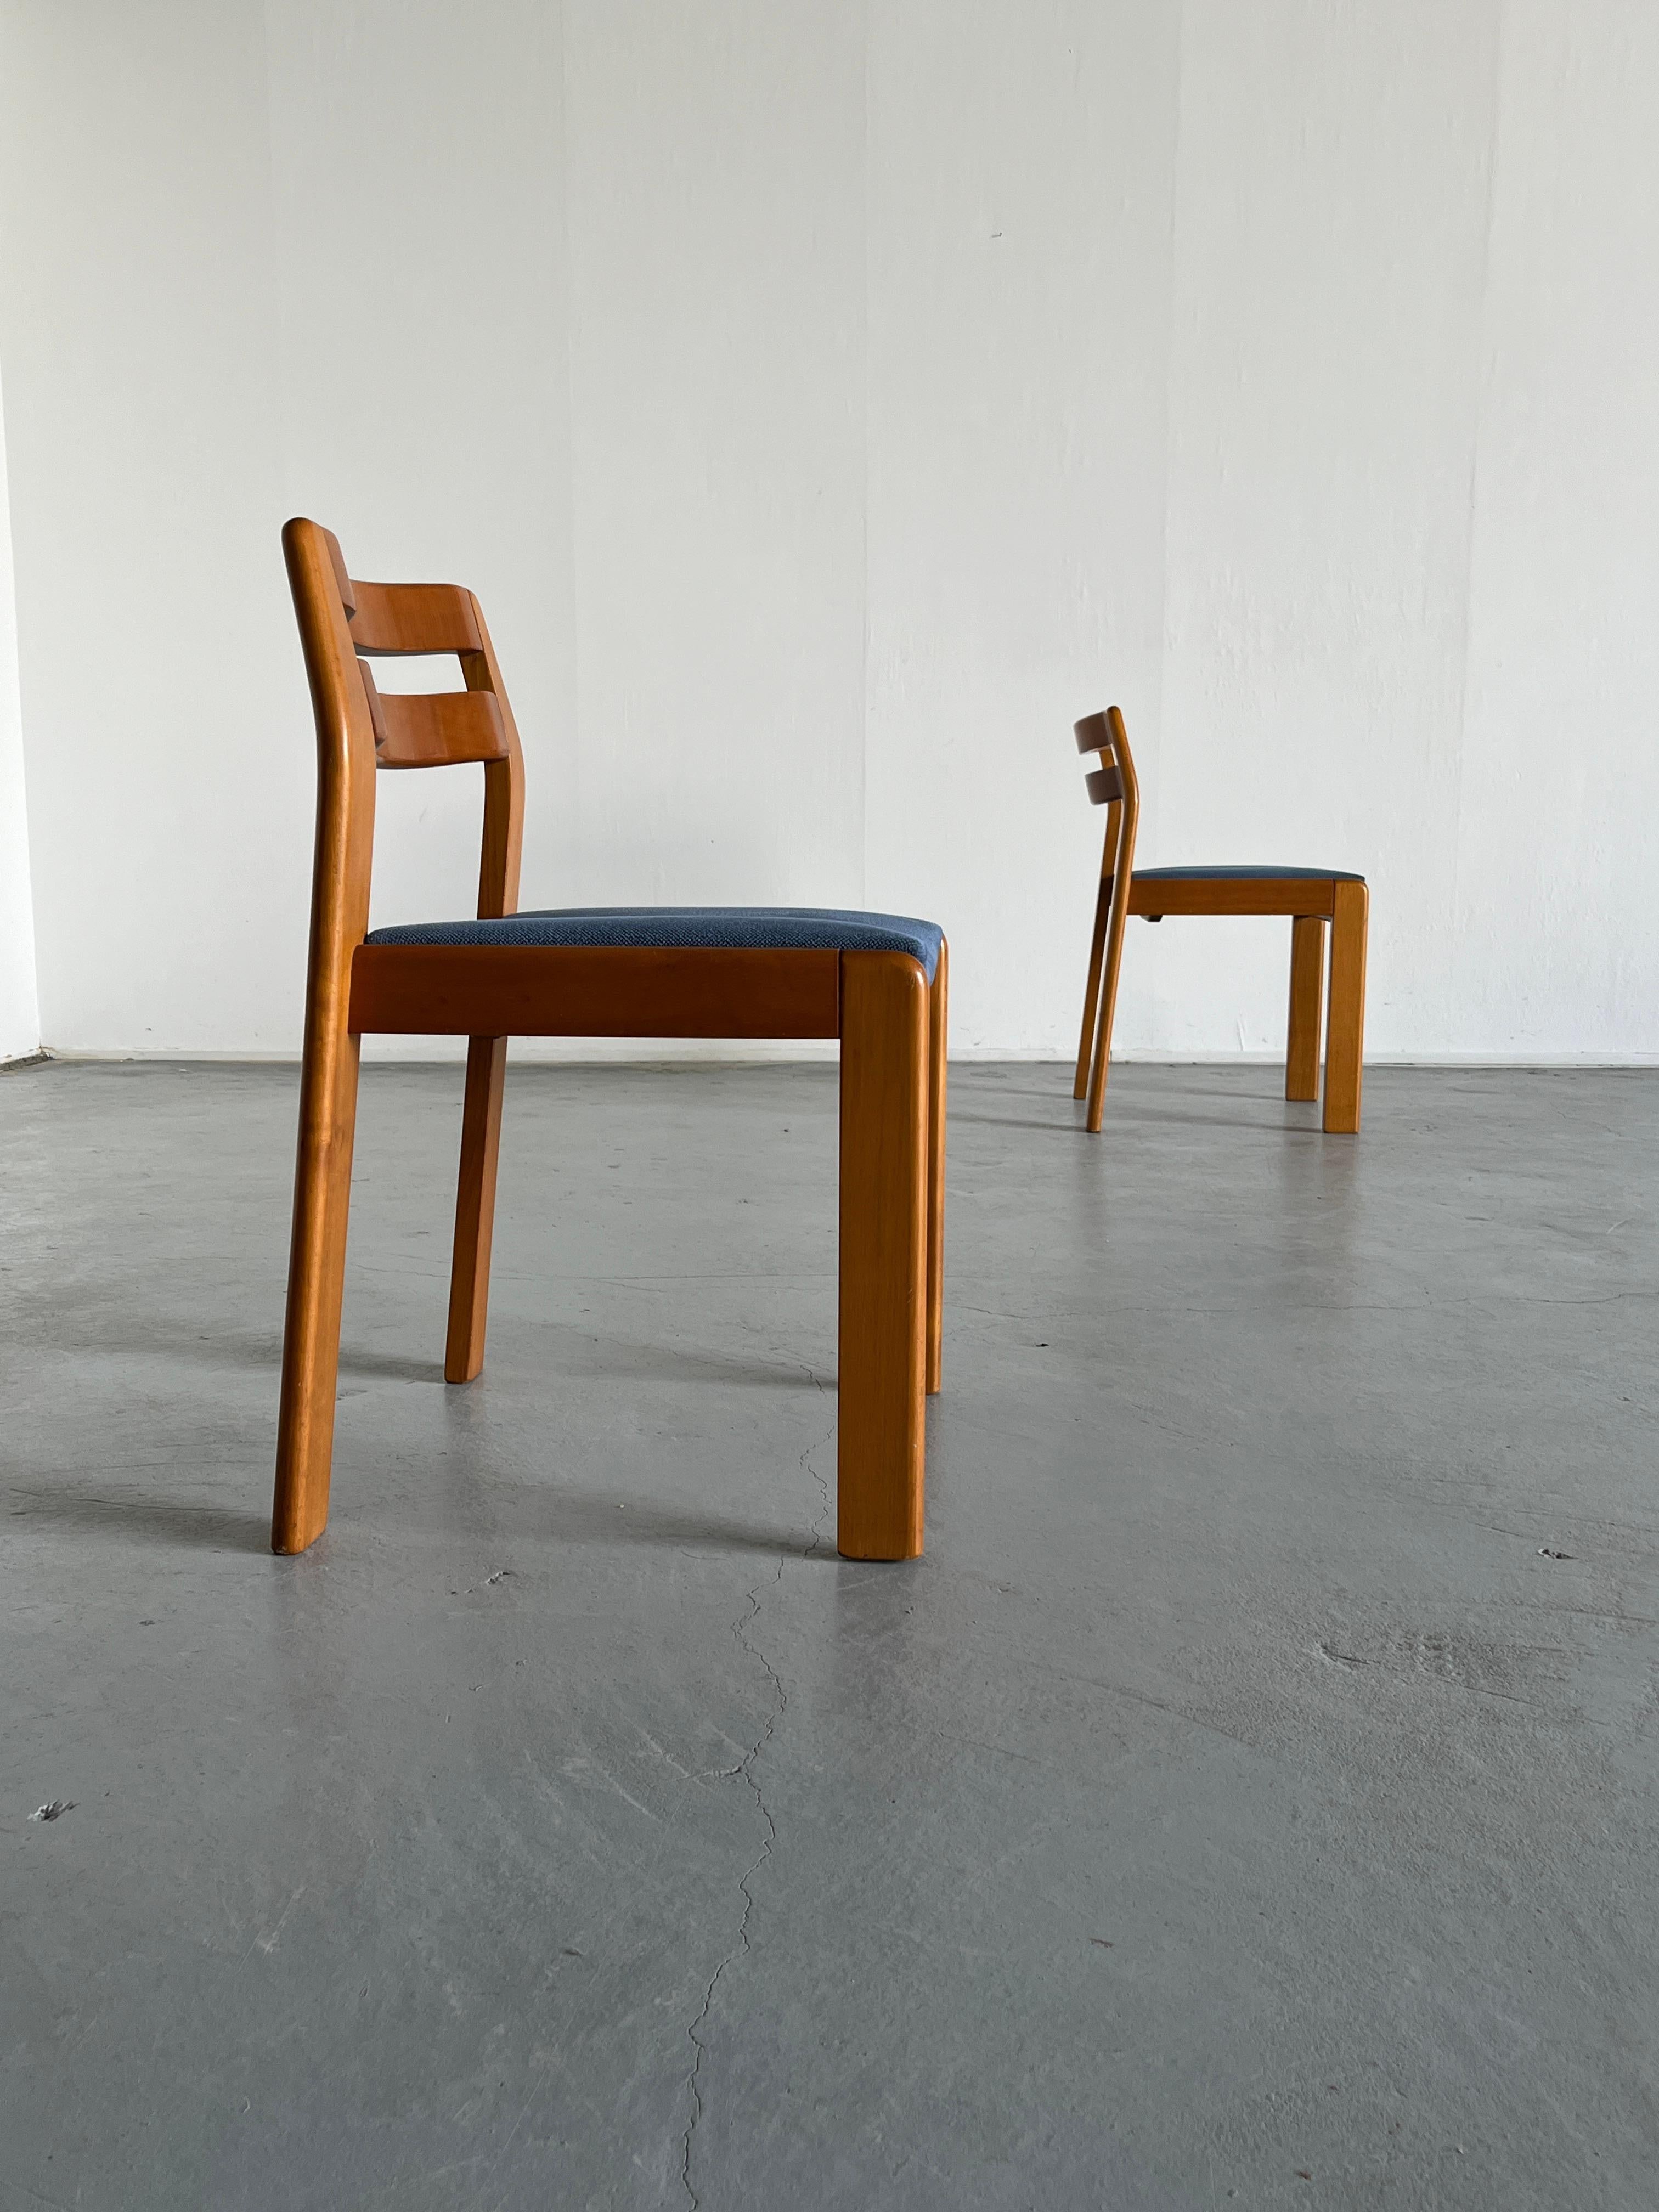 Pair of Elegant Italian Mid-Century Modern Lacquered Wood Dining Chairs, 1960s For Sale 1